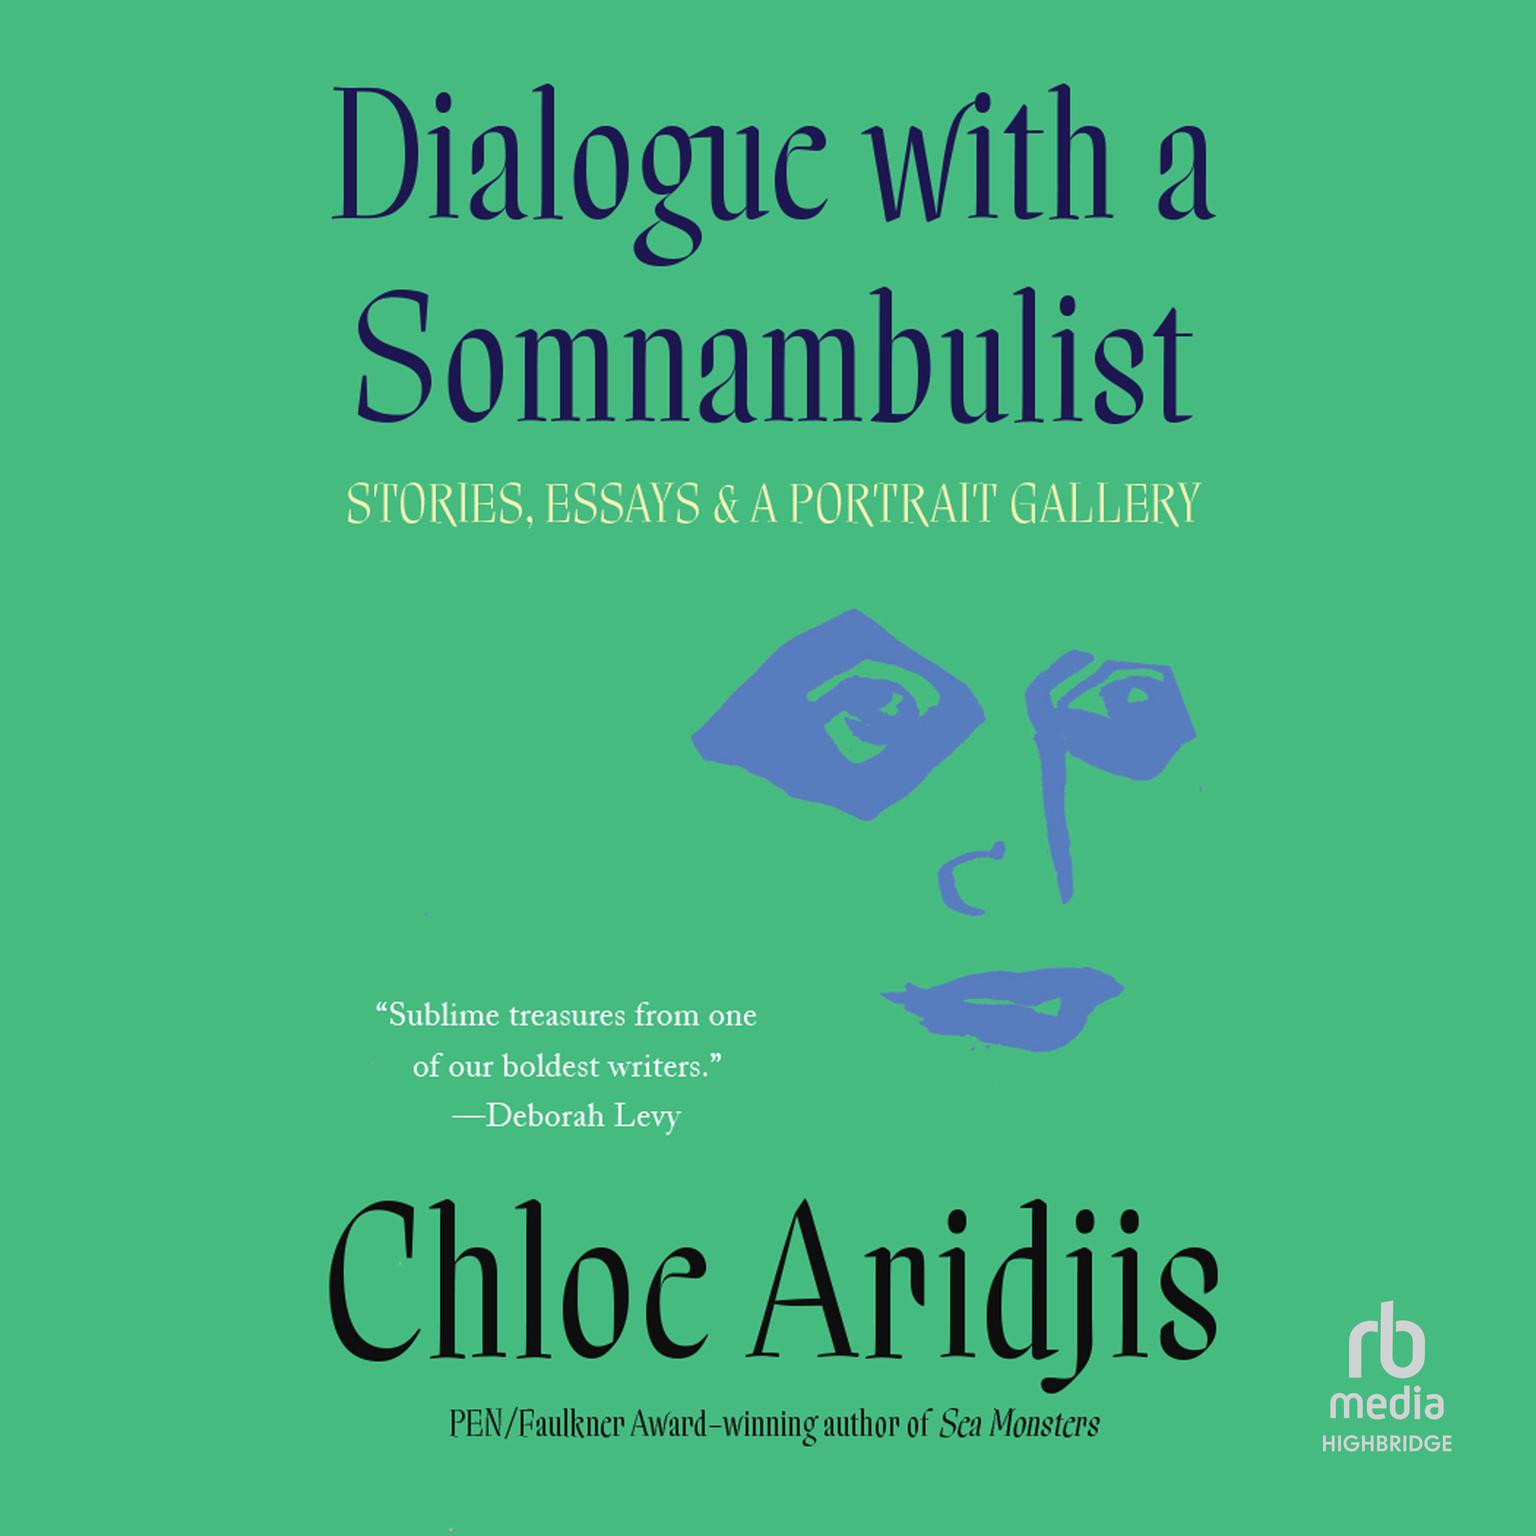 Dialogue with a Somnambulist: Stories, Essays & A Portrait Gallery Audiobook, by Chloe Aridjis